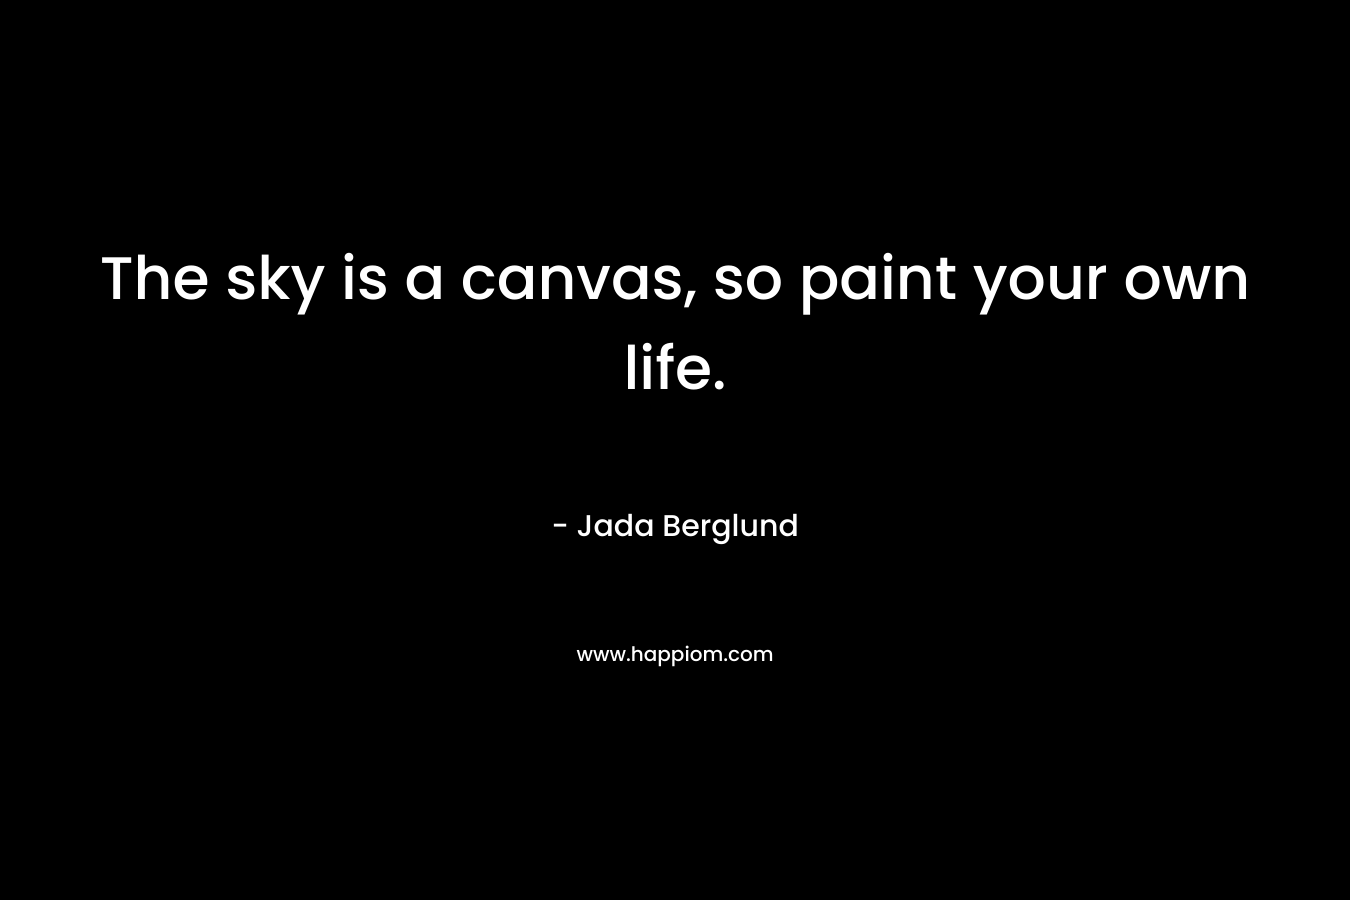 The sky is a canvas, so paint your own life. – Jada Berglund